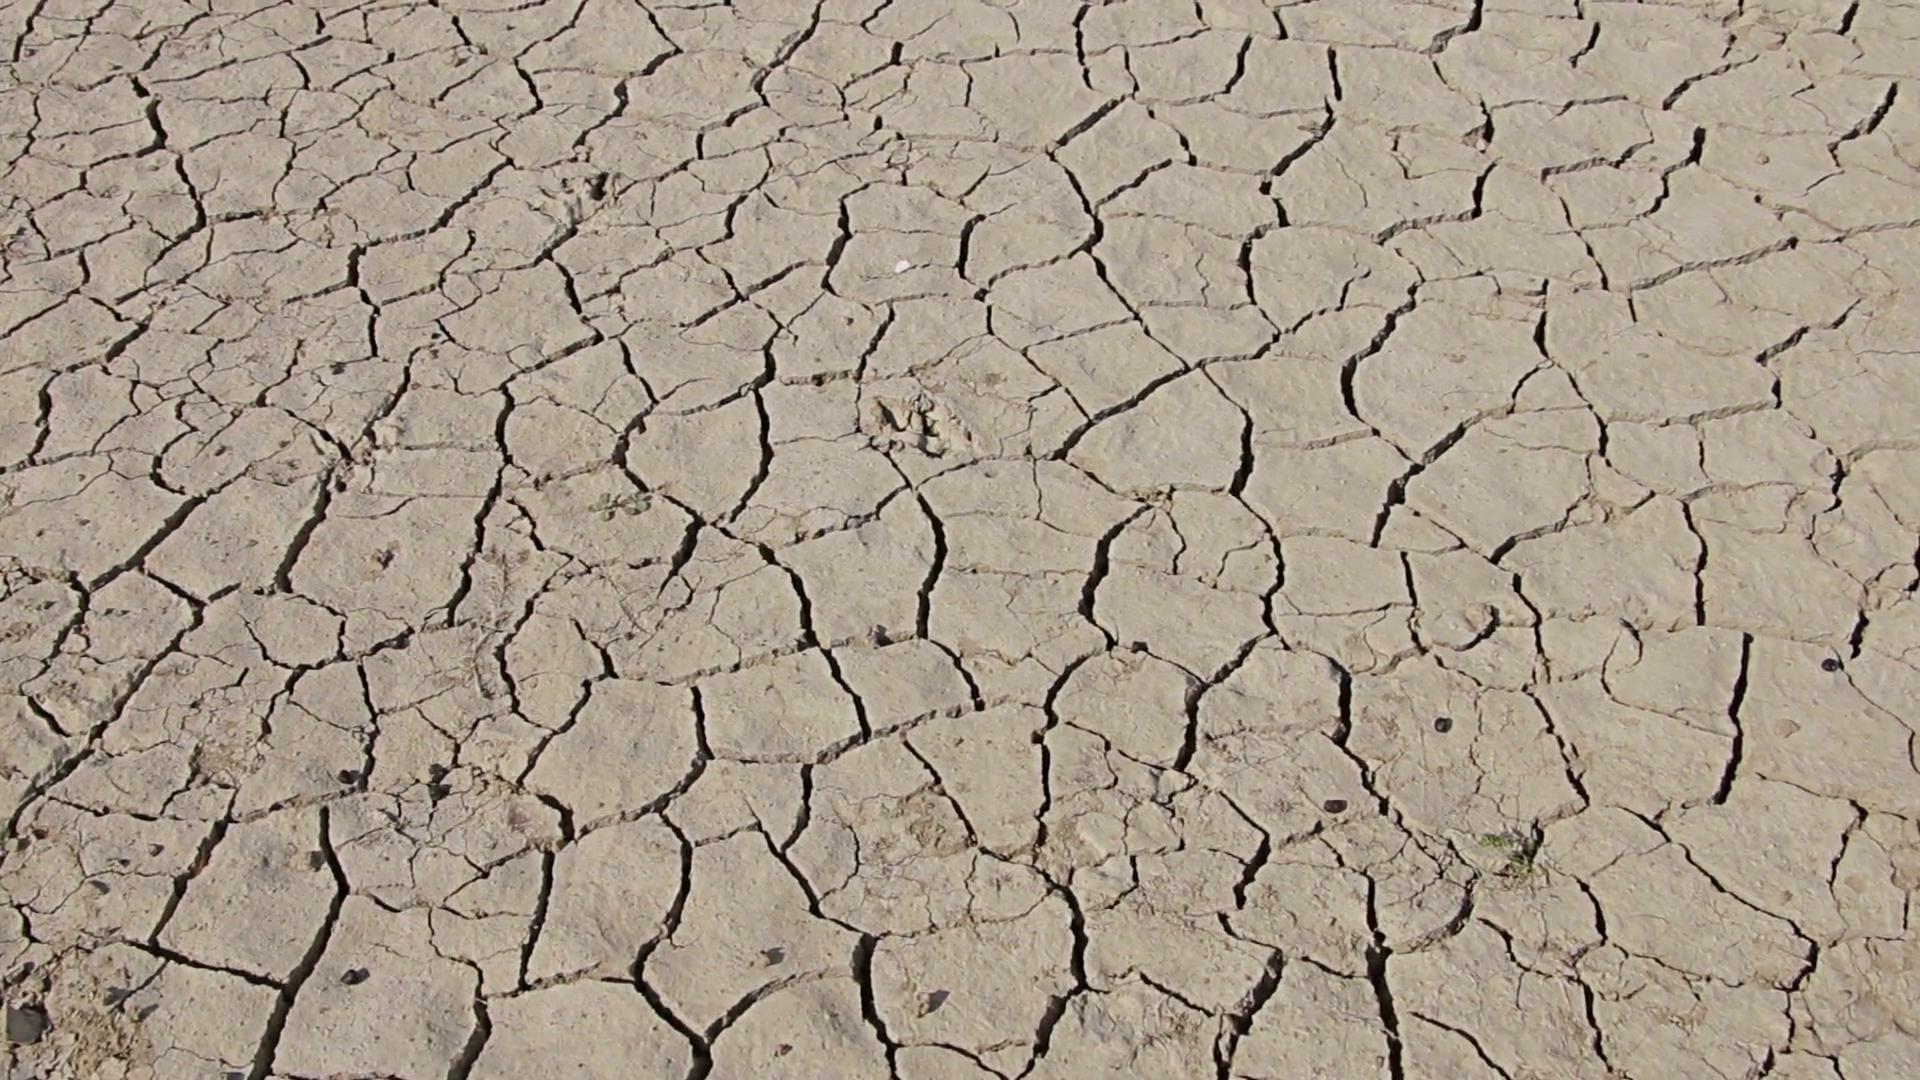 Walking on desert dry soil, first point of view. Climate change ...